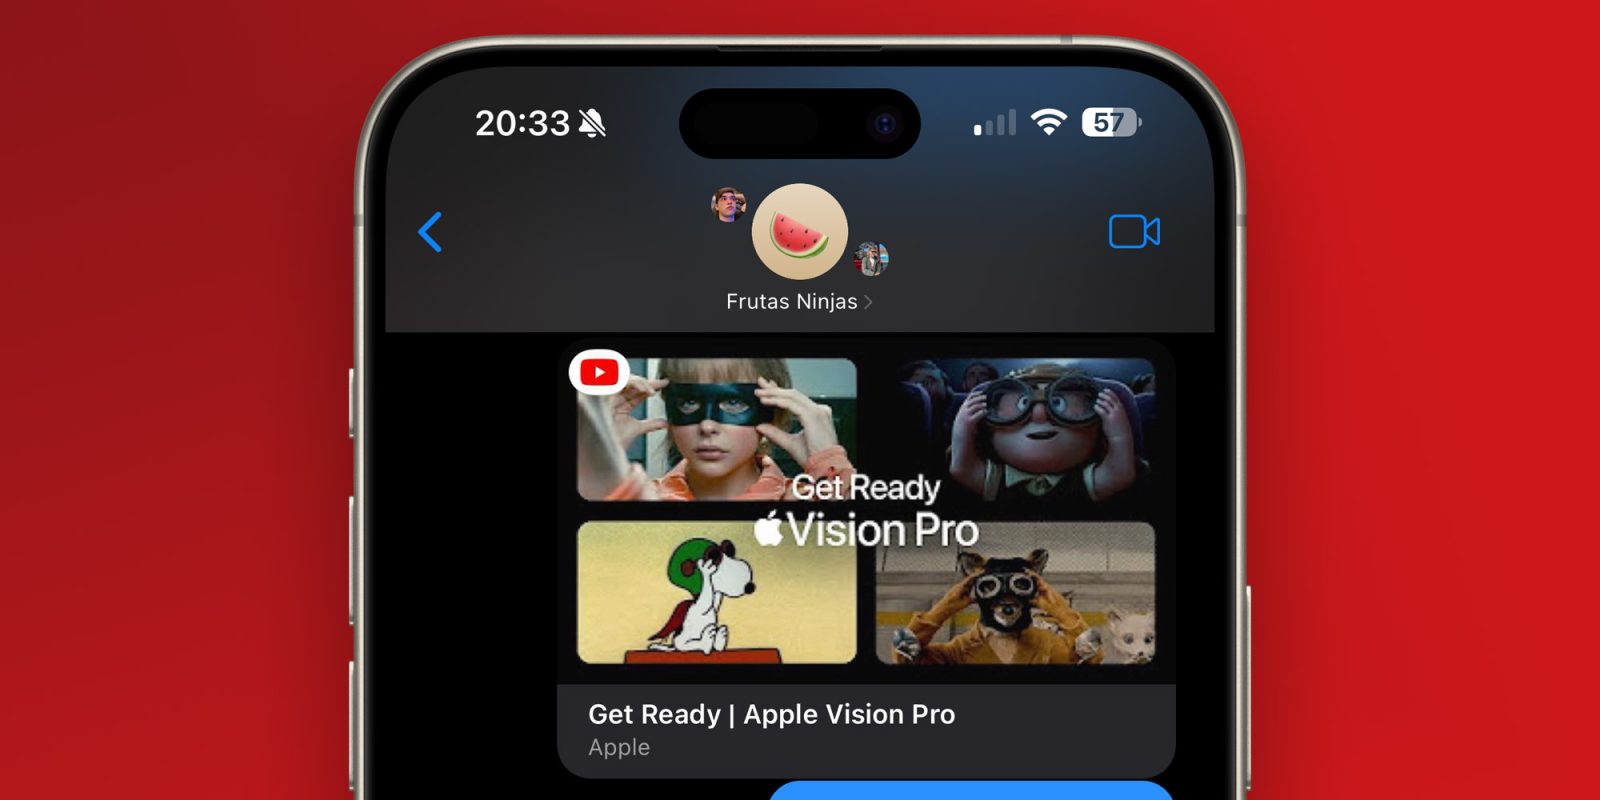 YouTube discontinues its iMessage mini-app for iPhone and iPad users